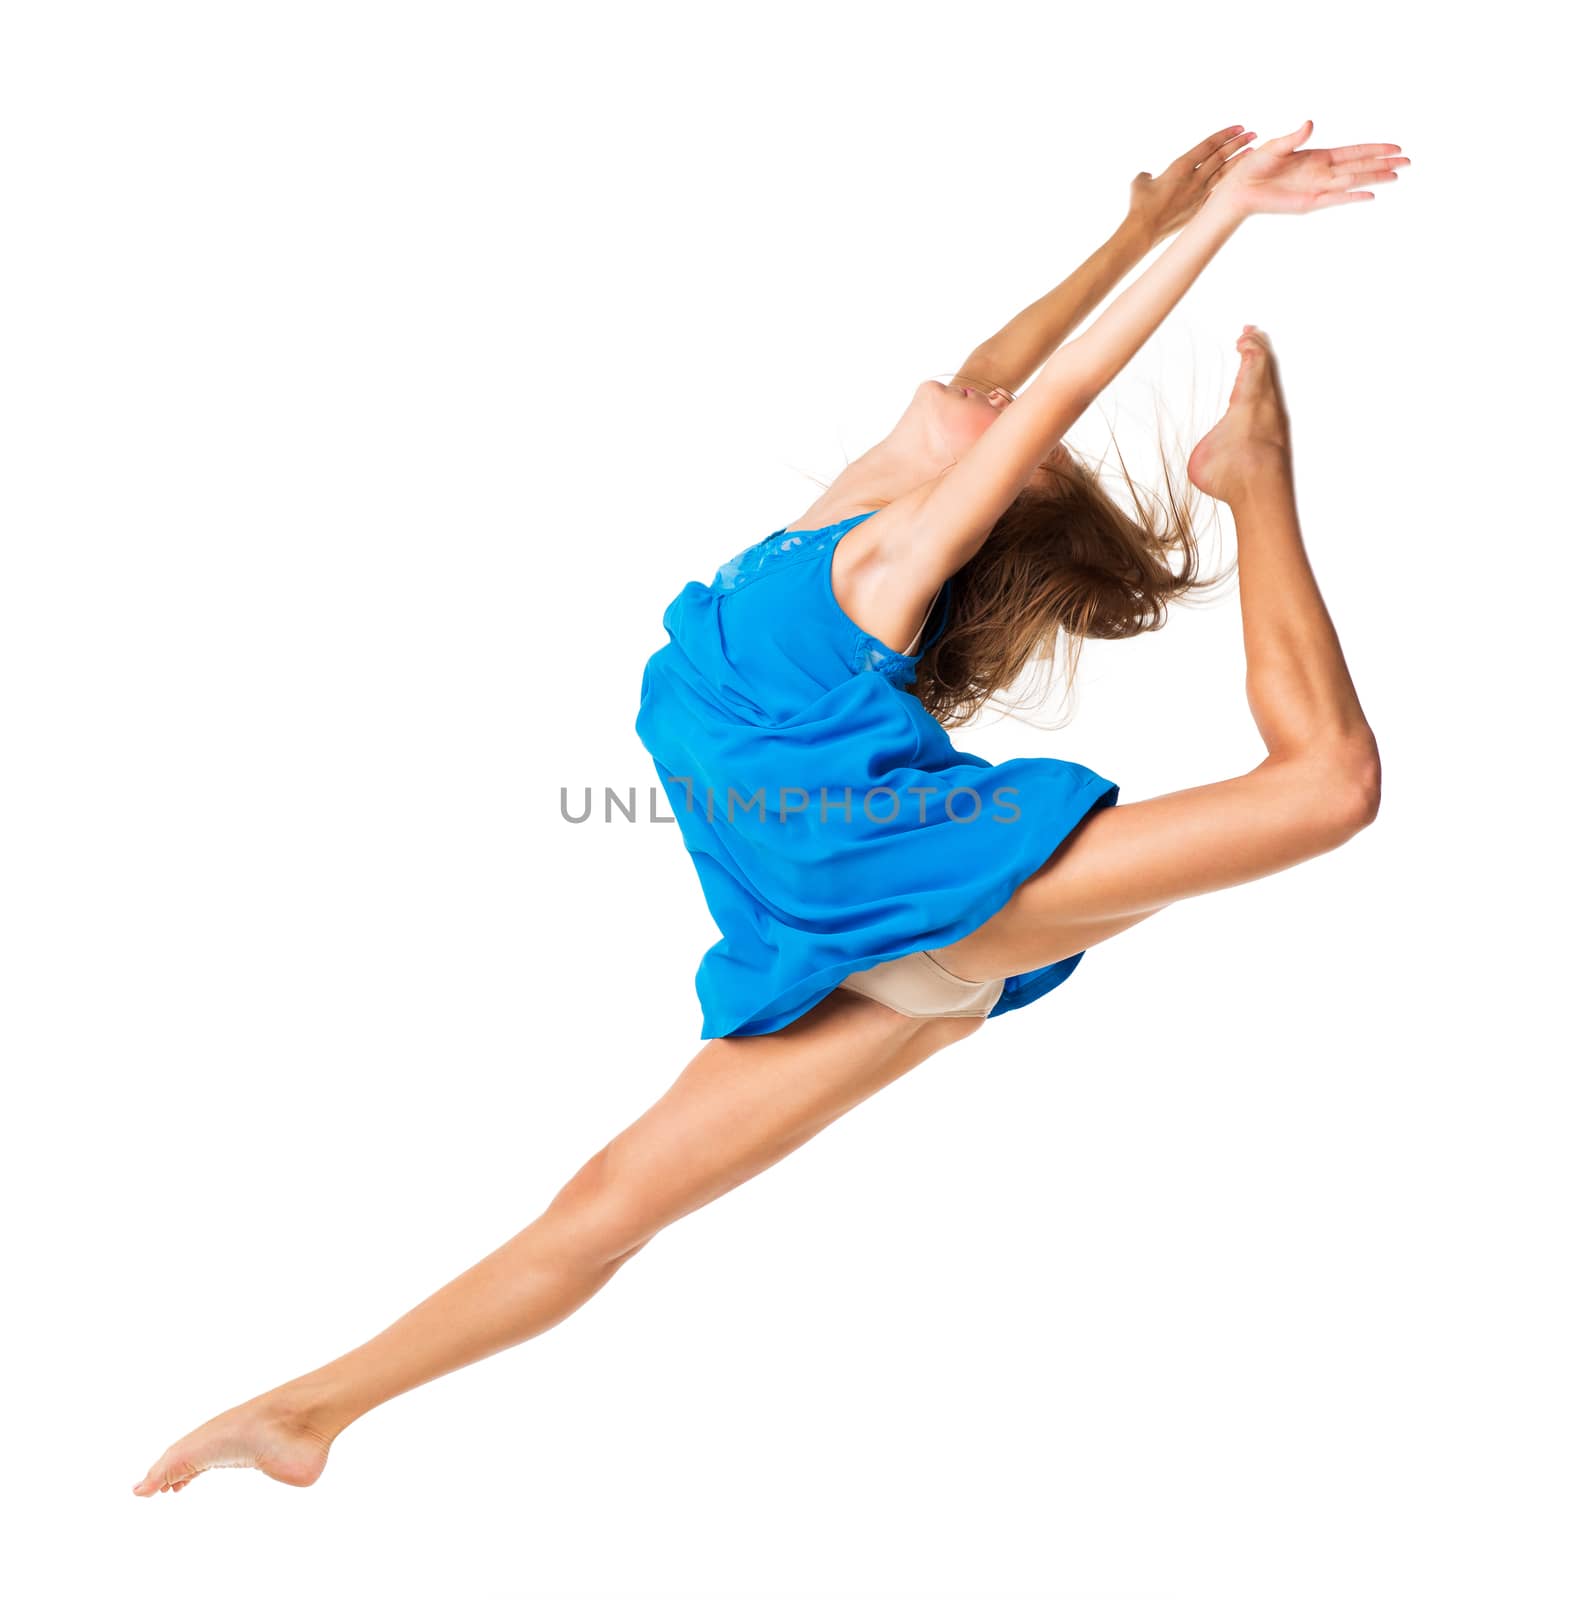 Young girl dancing in a blue dress on a white background